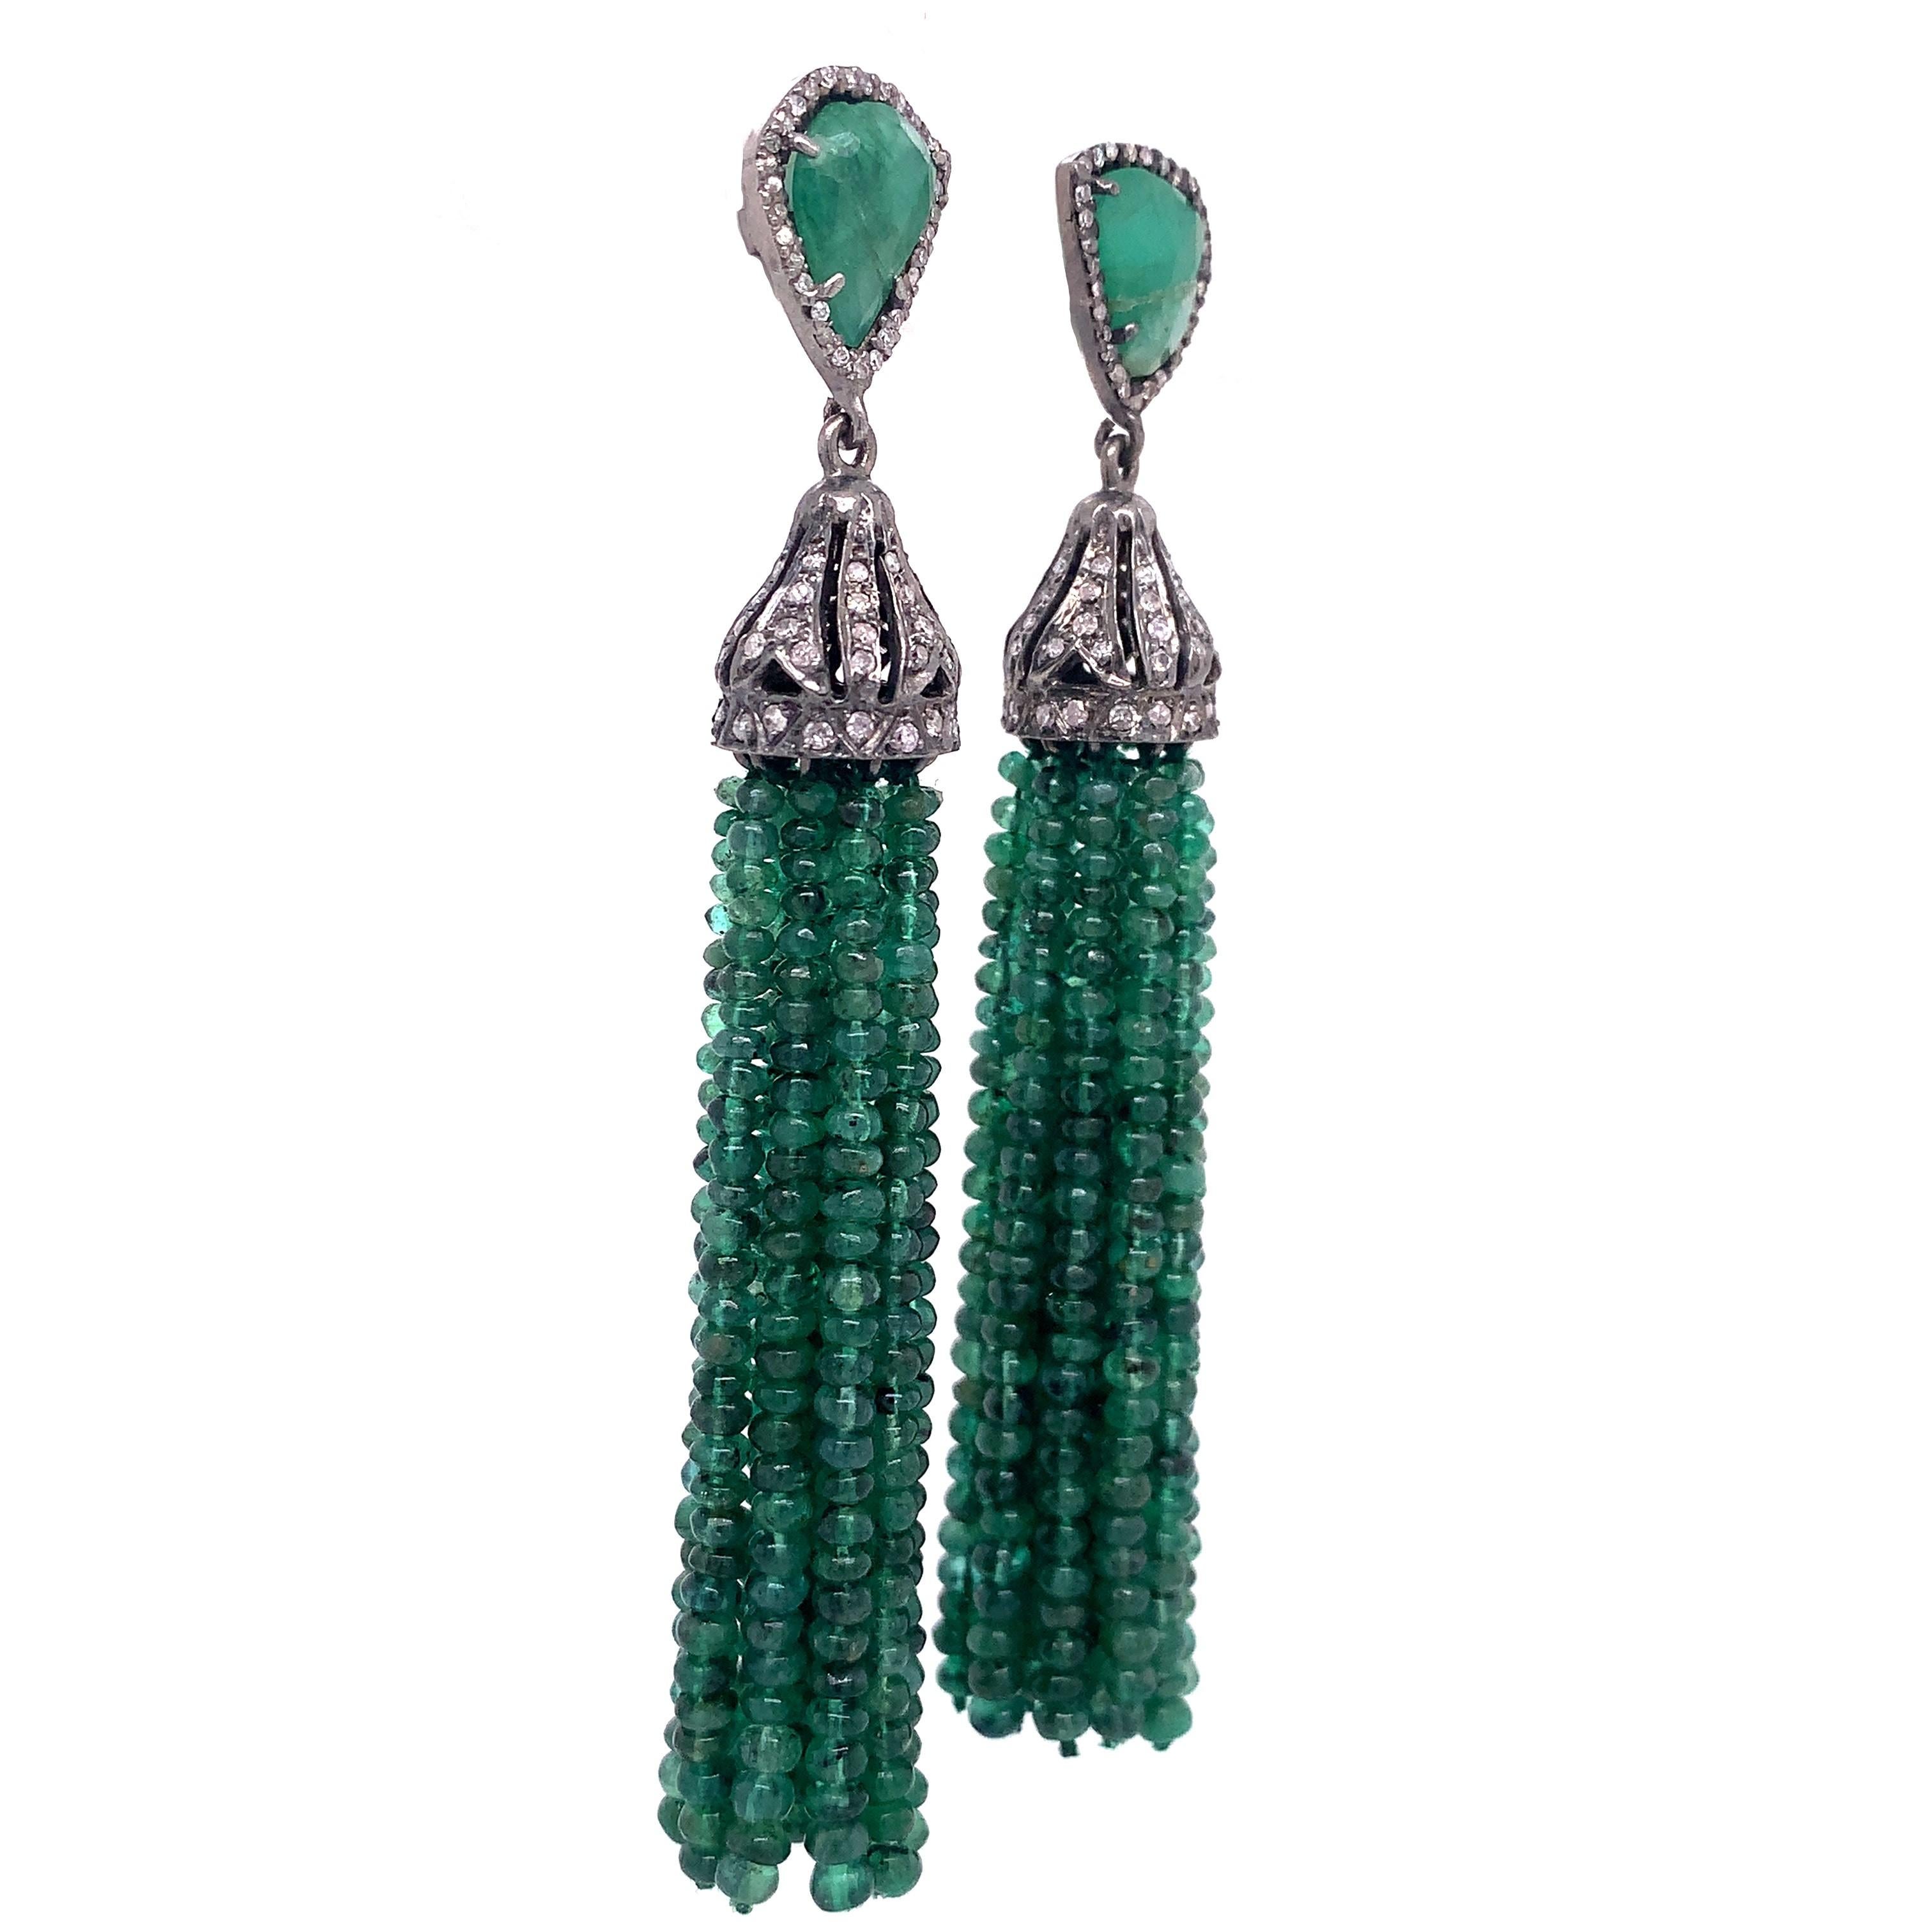 Life in color Collection

Natural Emerald Slice wrapped in diamonds and featured Emerald tassel beads dangling from a crown cup set in blackened Sterling Silver.

Emerald: 12.24ct total weight.
Diamond: 0.81ct total weight.